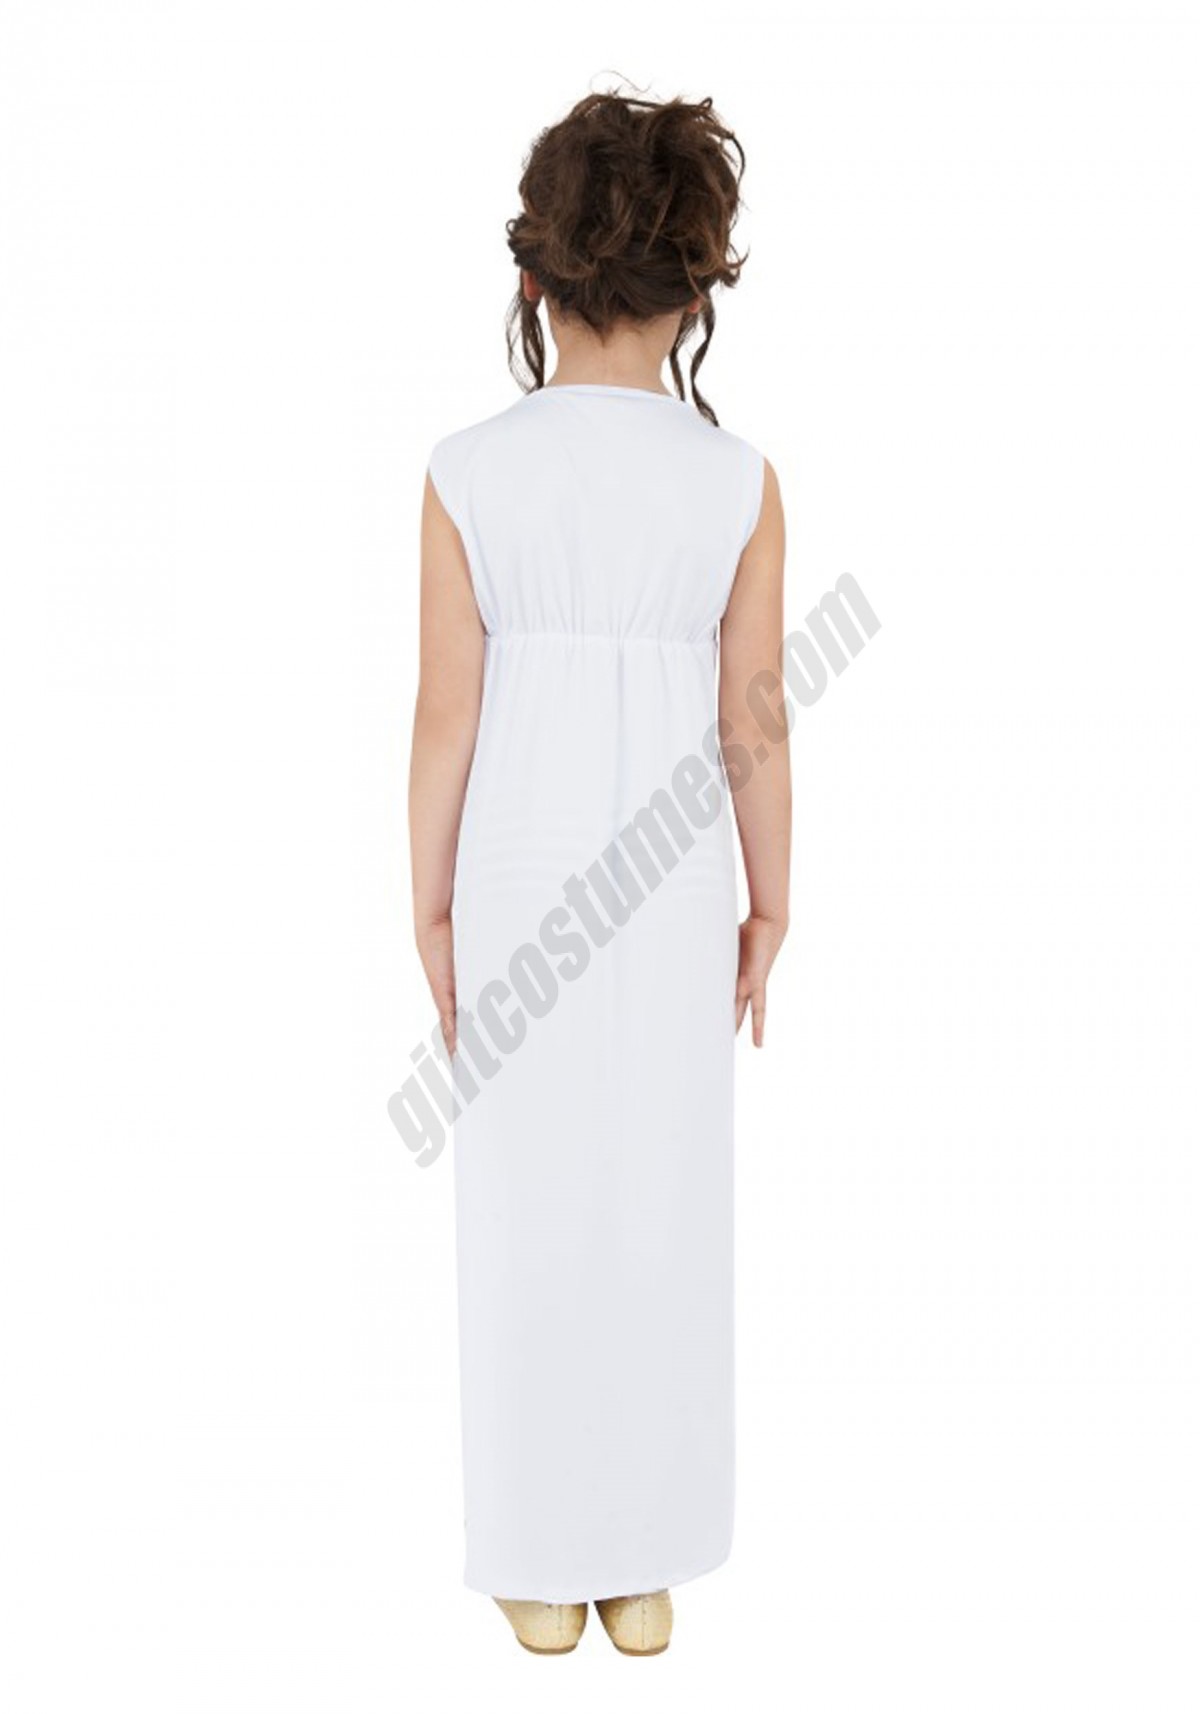 Roman Costume for Girls Promotions - -1